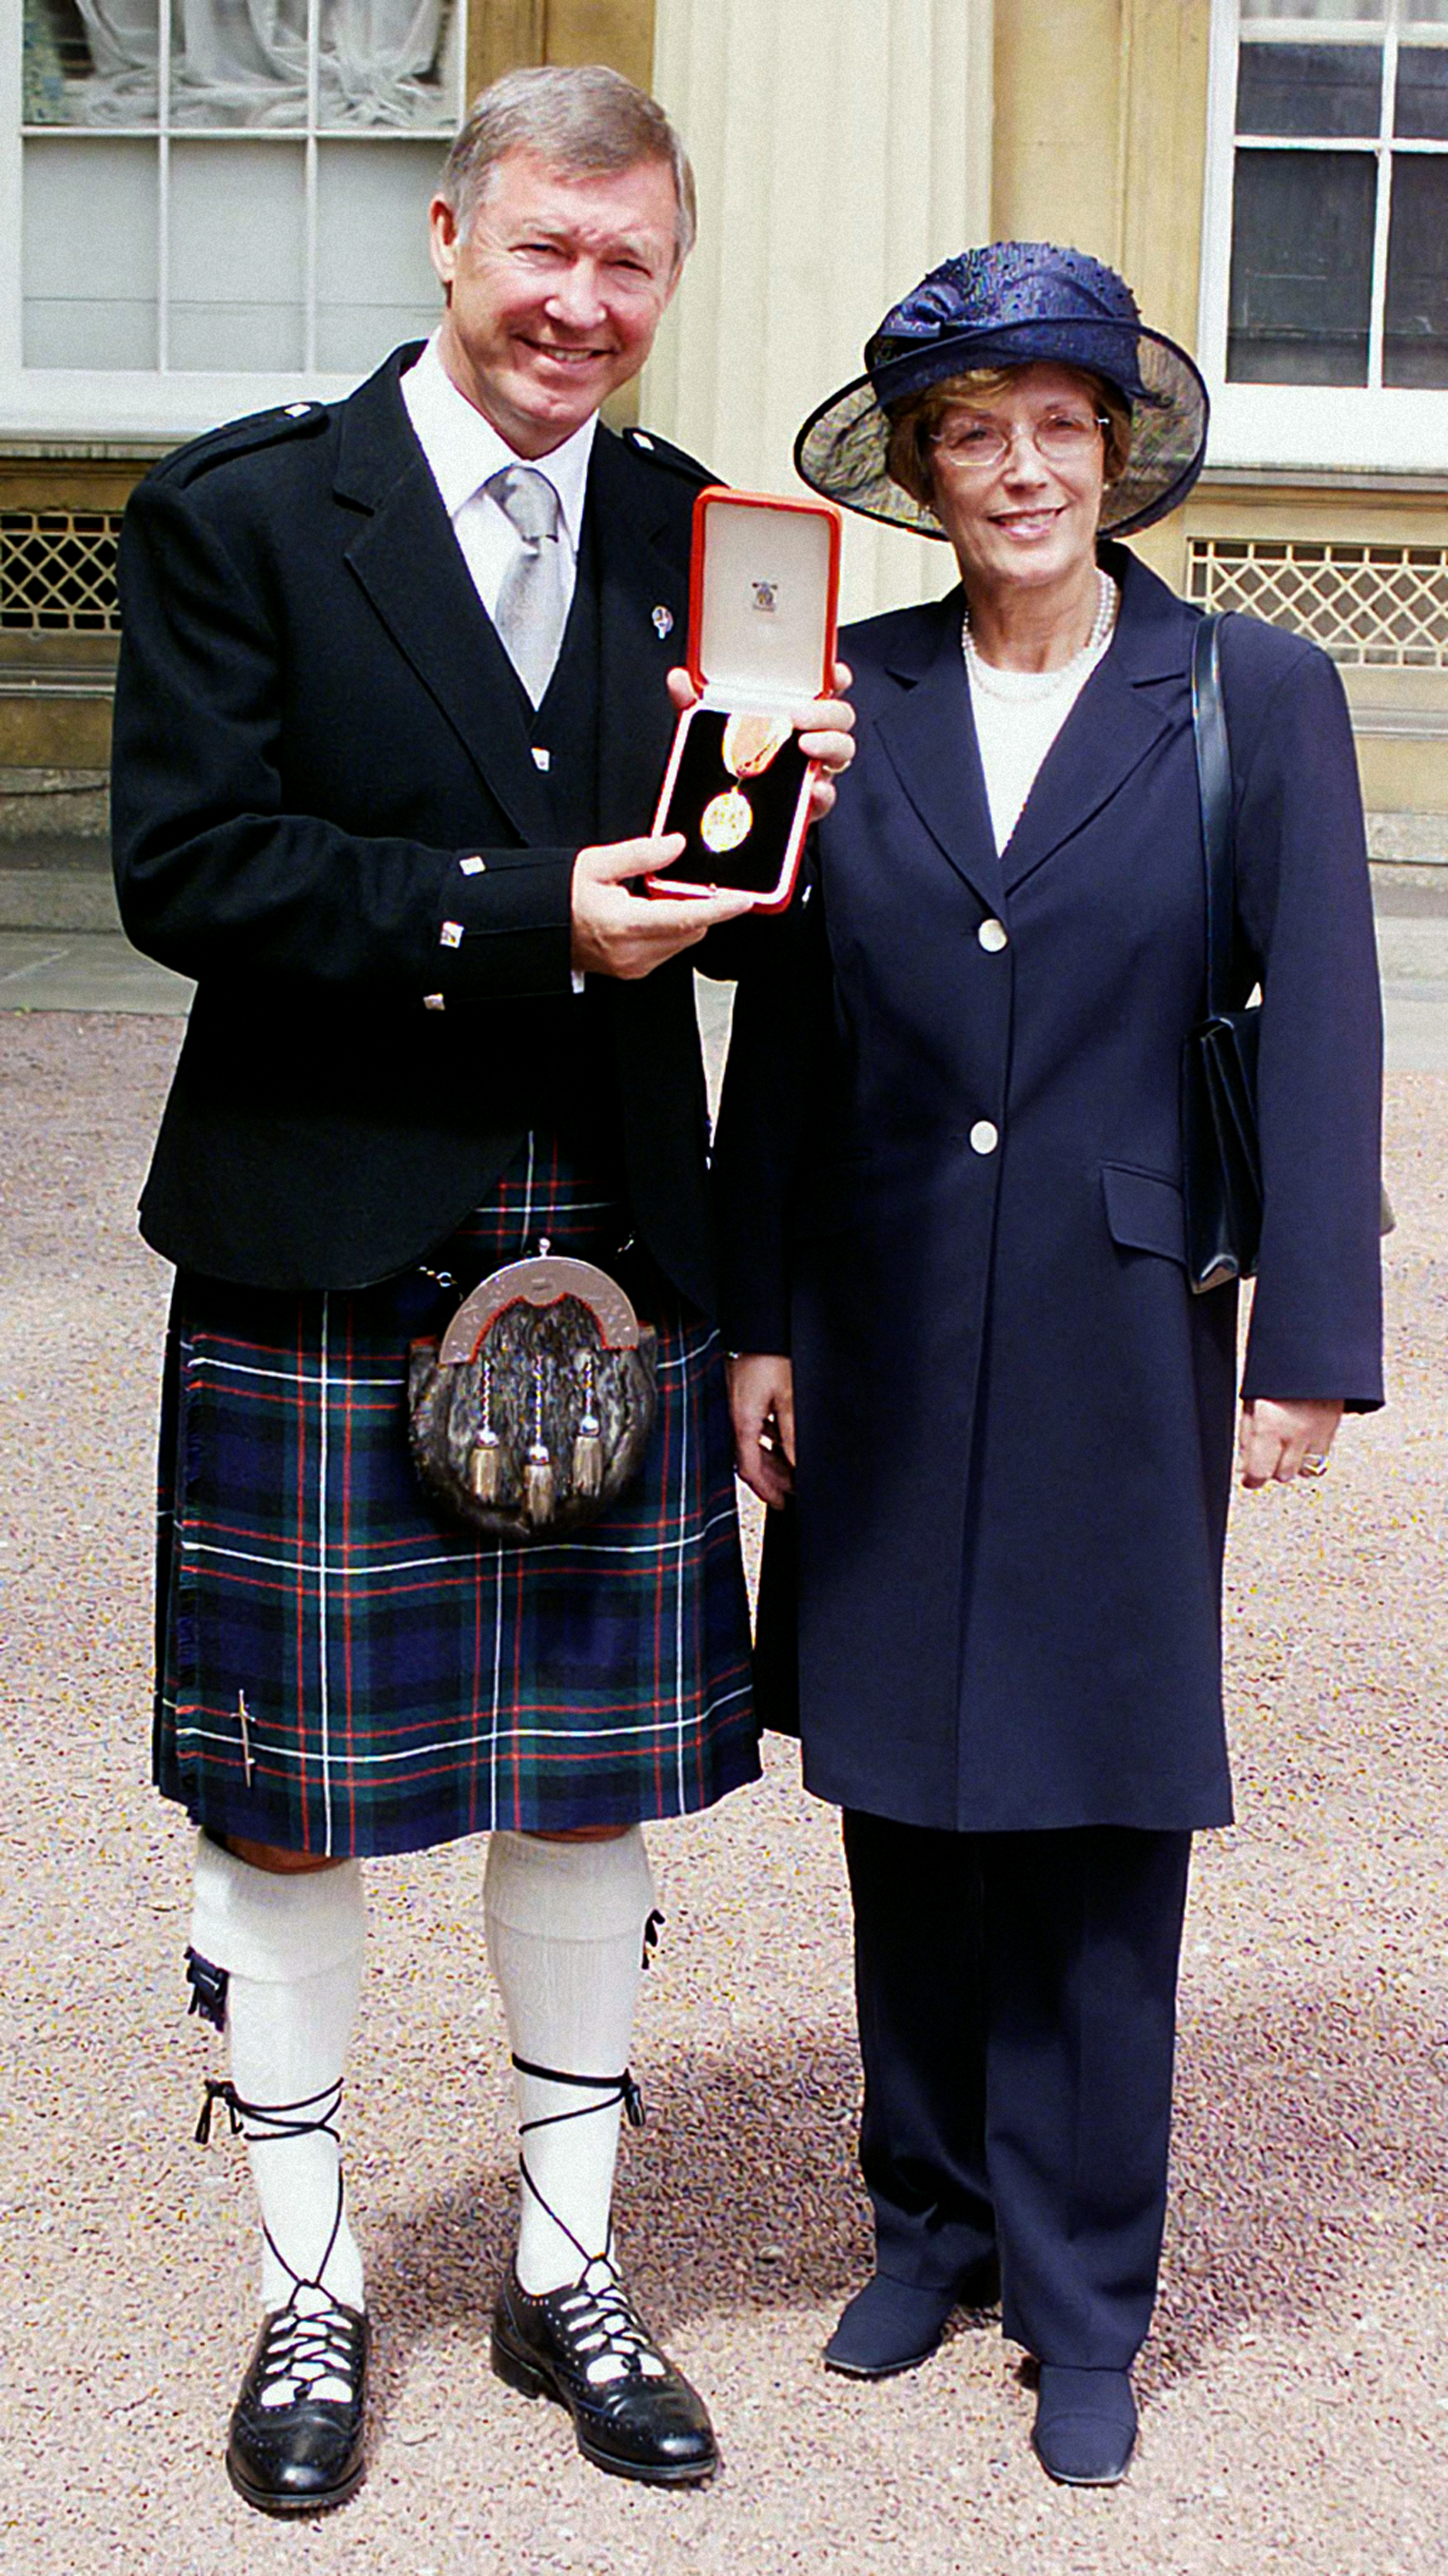 Sir Alex Ferguson with his wife Cathy, right, after he was knighted in 1999